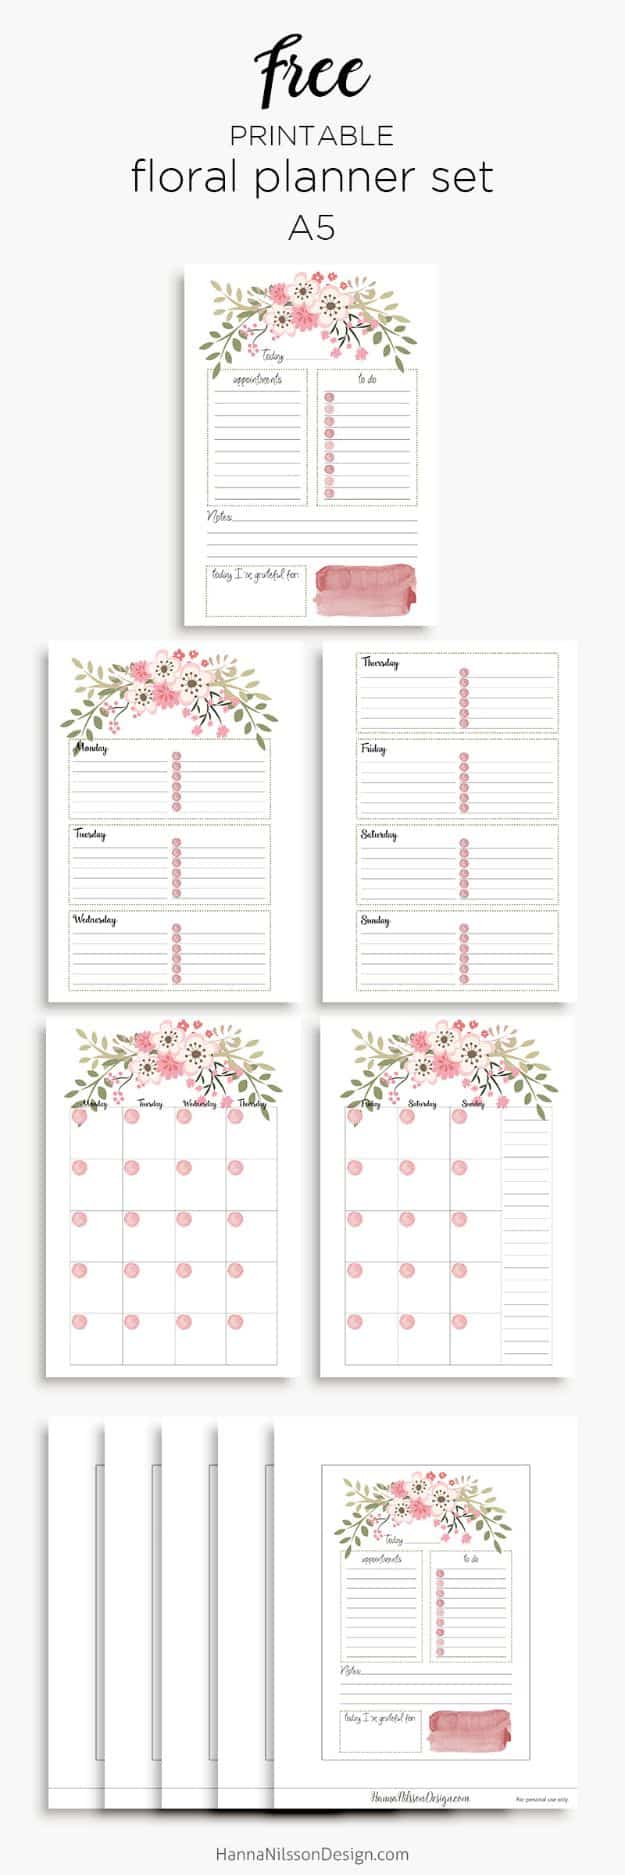 DIY Calendars - Pink Floral Planner Calendar Inserts - Homemade Calender Ideas That Make Great Cheap Gifts for Christmas - Desk, Wall and Glass Dry Erase Organizing Calendar Projects With Step by Step Tutorials - Paint, Stamp, Magnetic, Family Planner and Organizer #diycalendar #diyideas #crafts #calendars #organizing #diygifts #calendars #diyideas